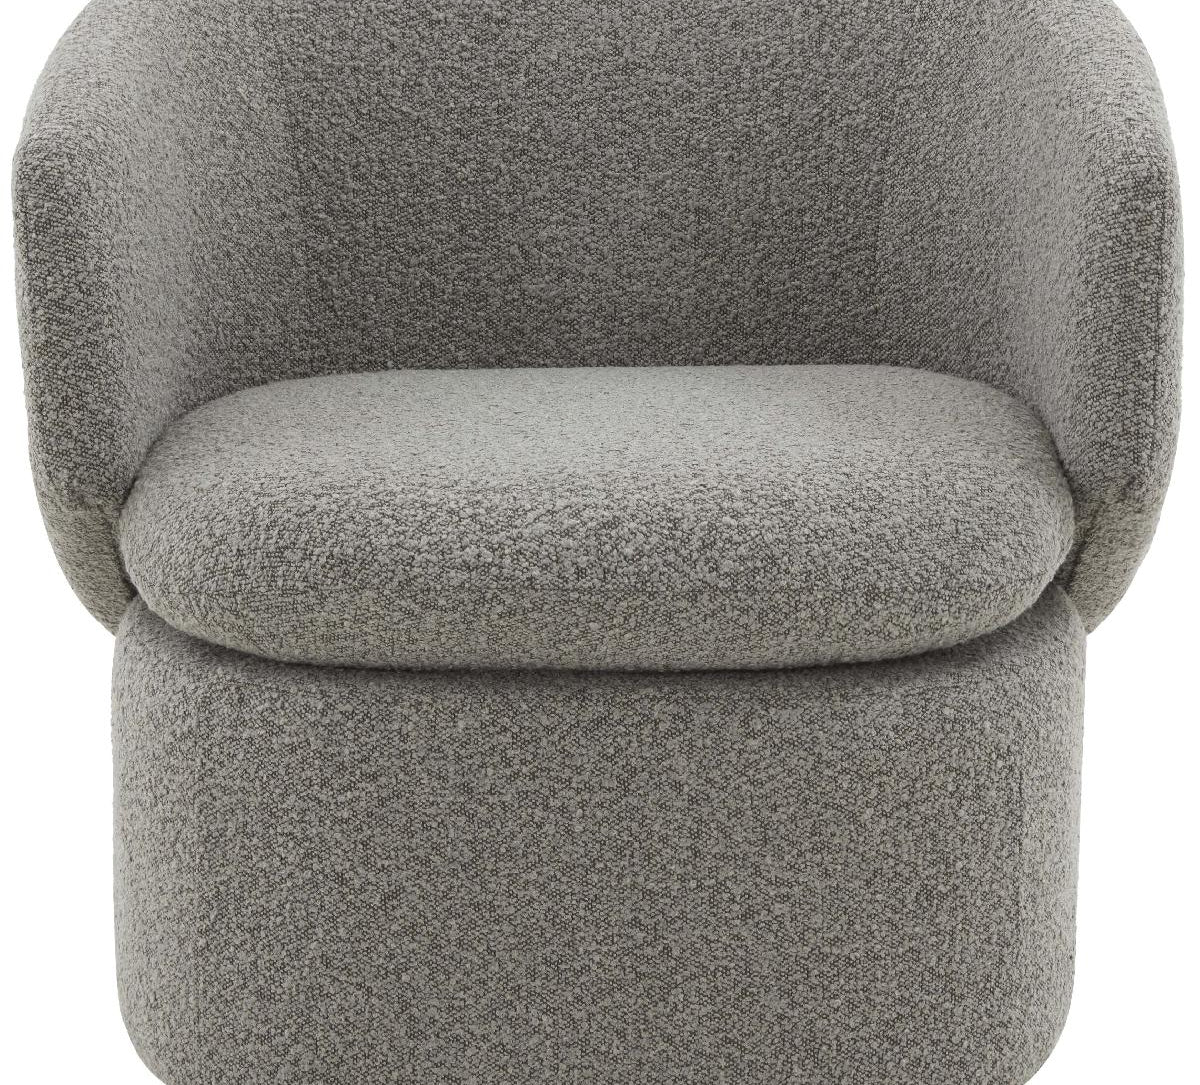 Safavieh Couture Phyllis Boucle Swivel Chair - Grey